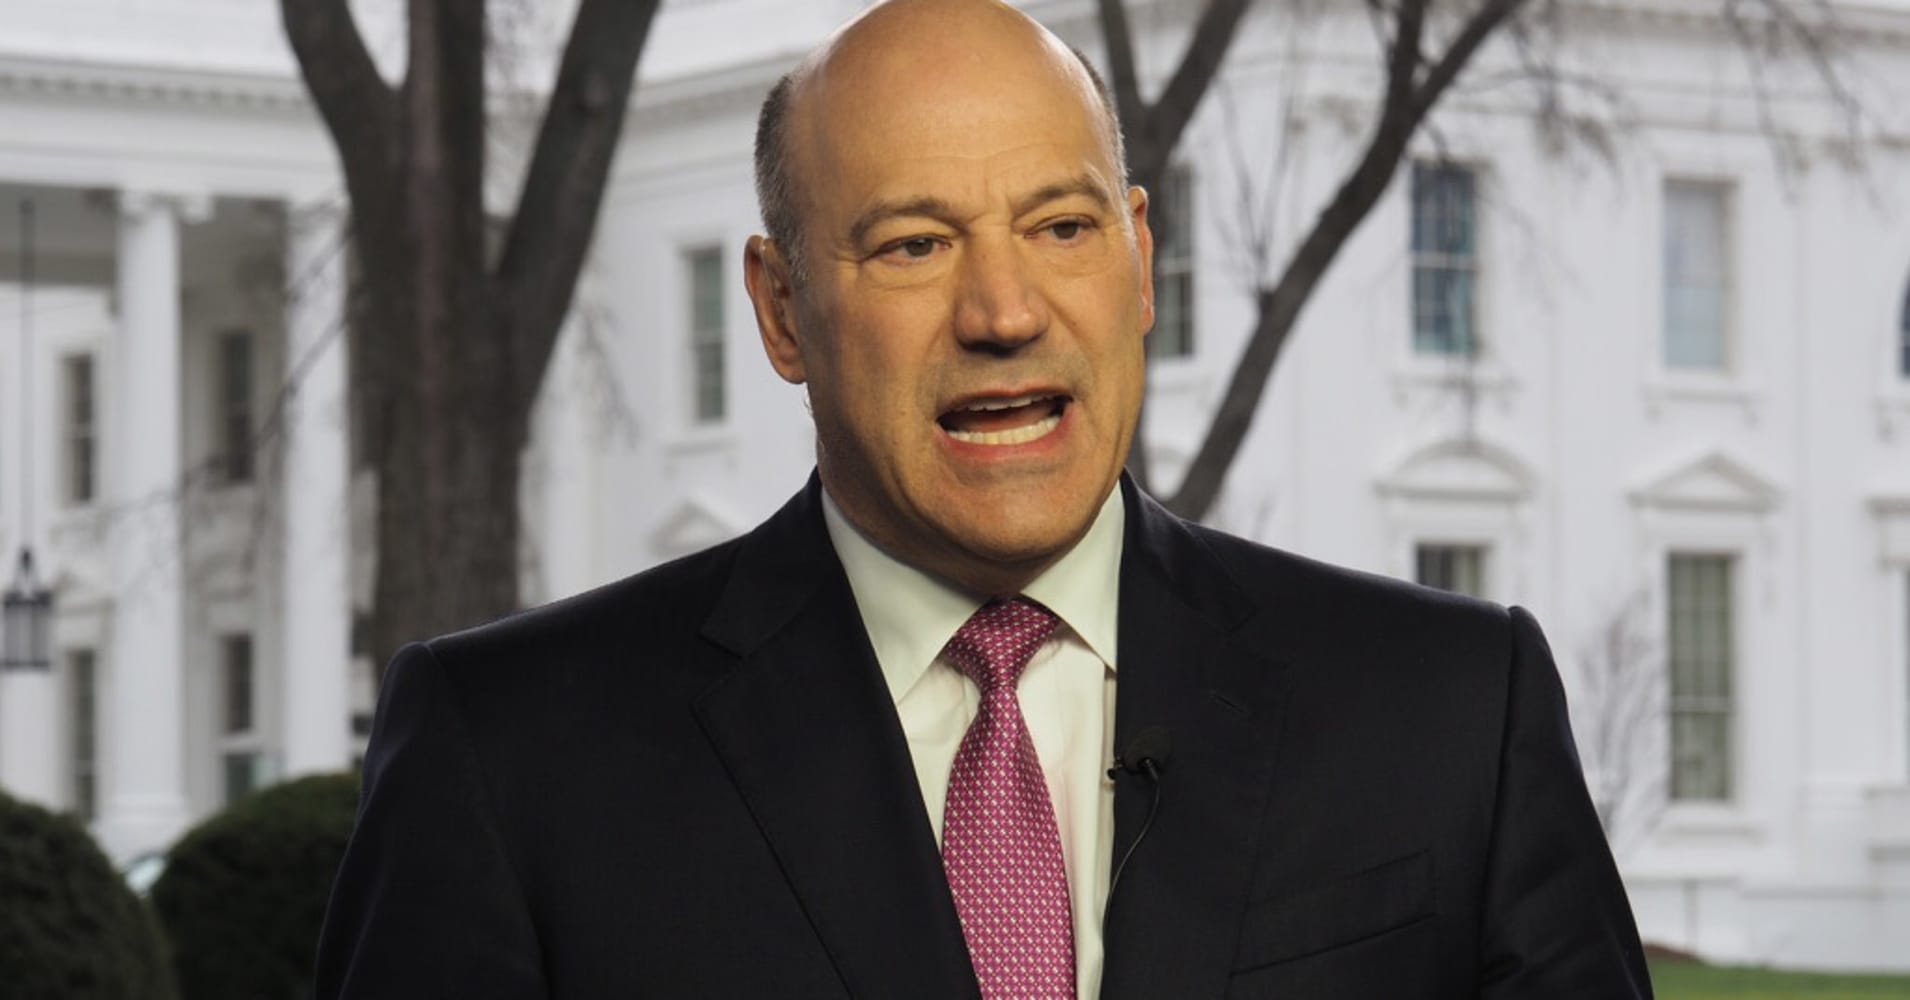 Gary Cohn lashes out at former White House colleagues: 'Living in chaos'